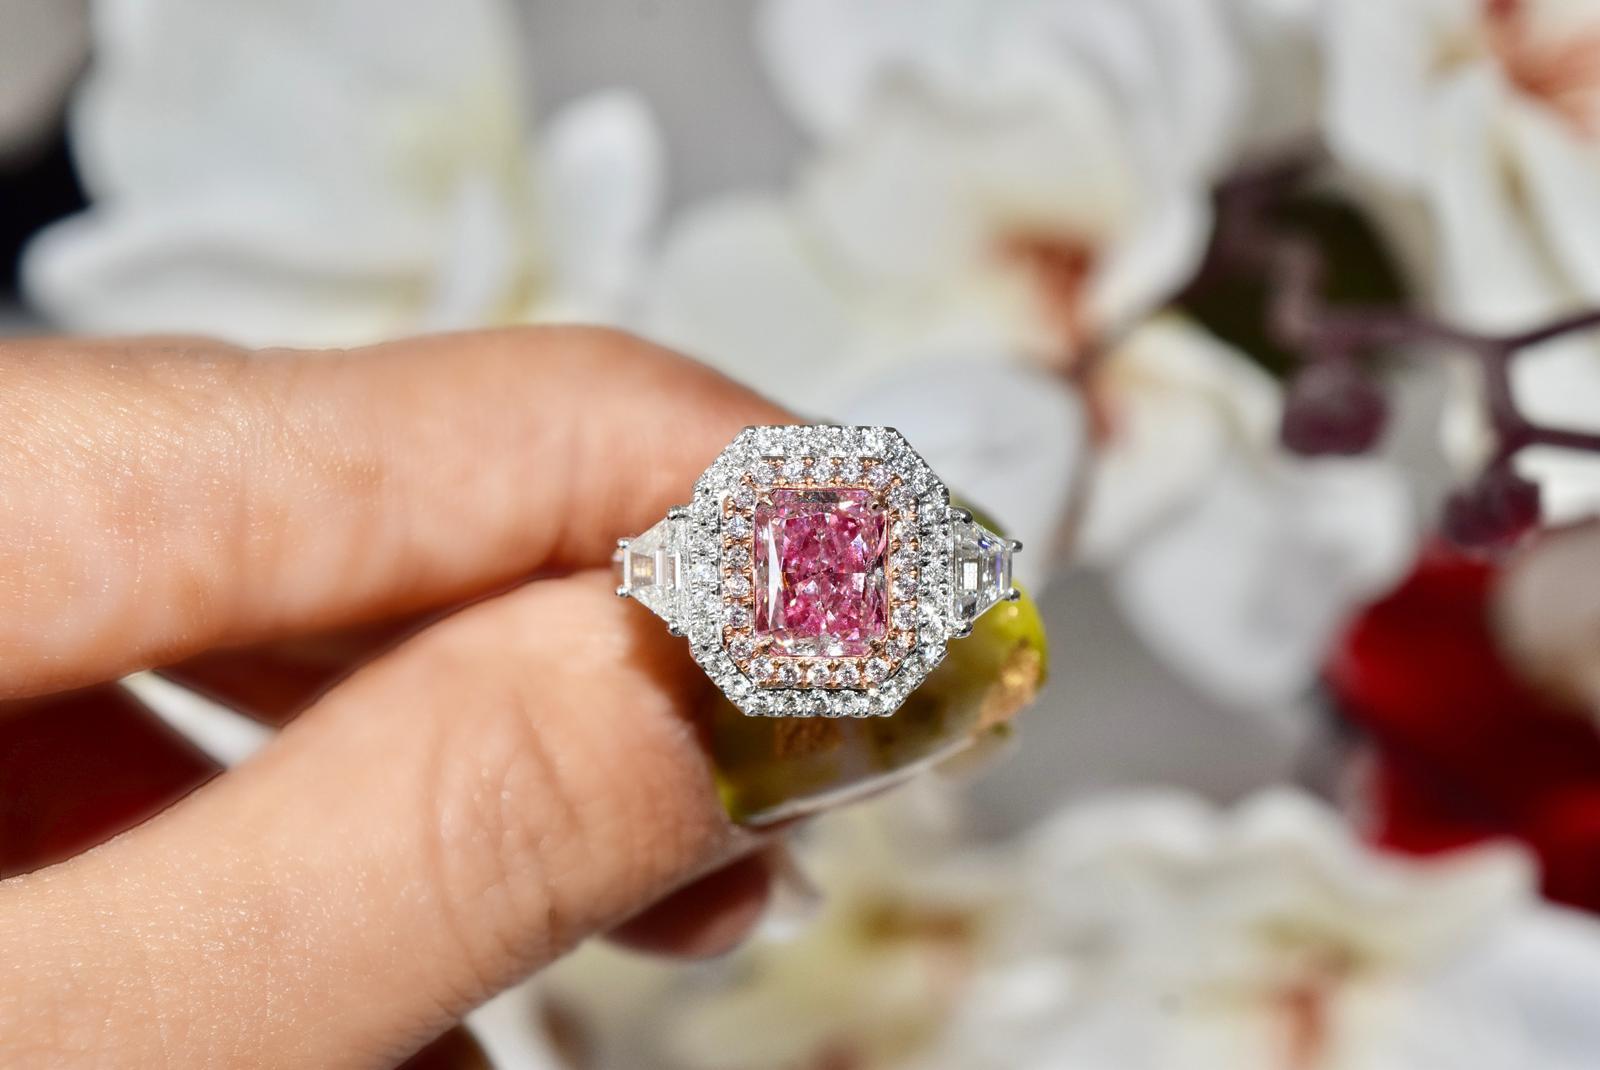 **100% NATURAL FANCY COLOUR DIAMOND JEWELRY**

✪ Jewelry Details ✪

♦ MAIN STONE DETAILS

➛ Stone Shape: Radiant
➛ Stone Color: Fancy Brown Pink
➛ Stone Weight: 2.01 carat
➛ Clarity: SI1
➛ GIA certified

♦ SIDE STONE DETAILS

➛ Side White Diamonds -